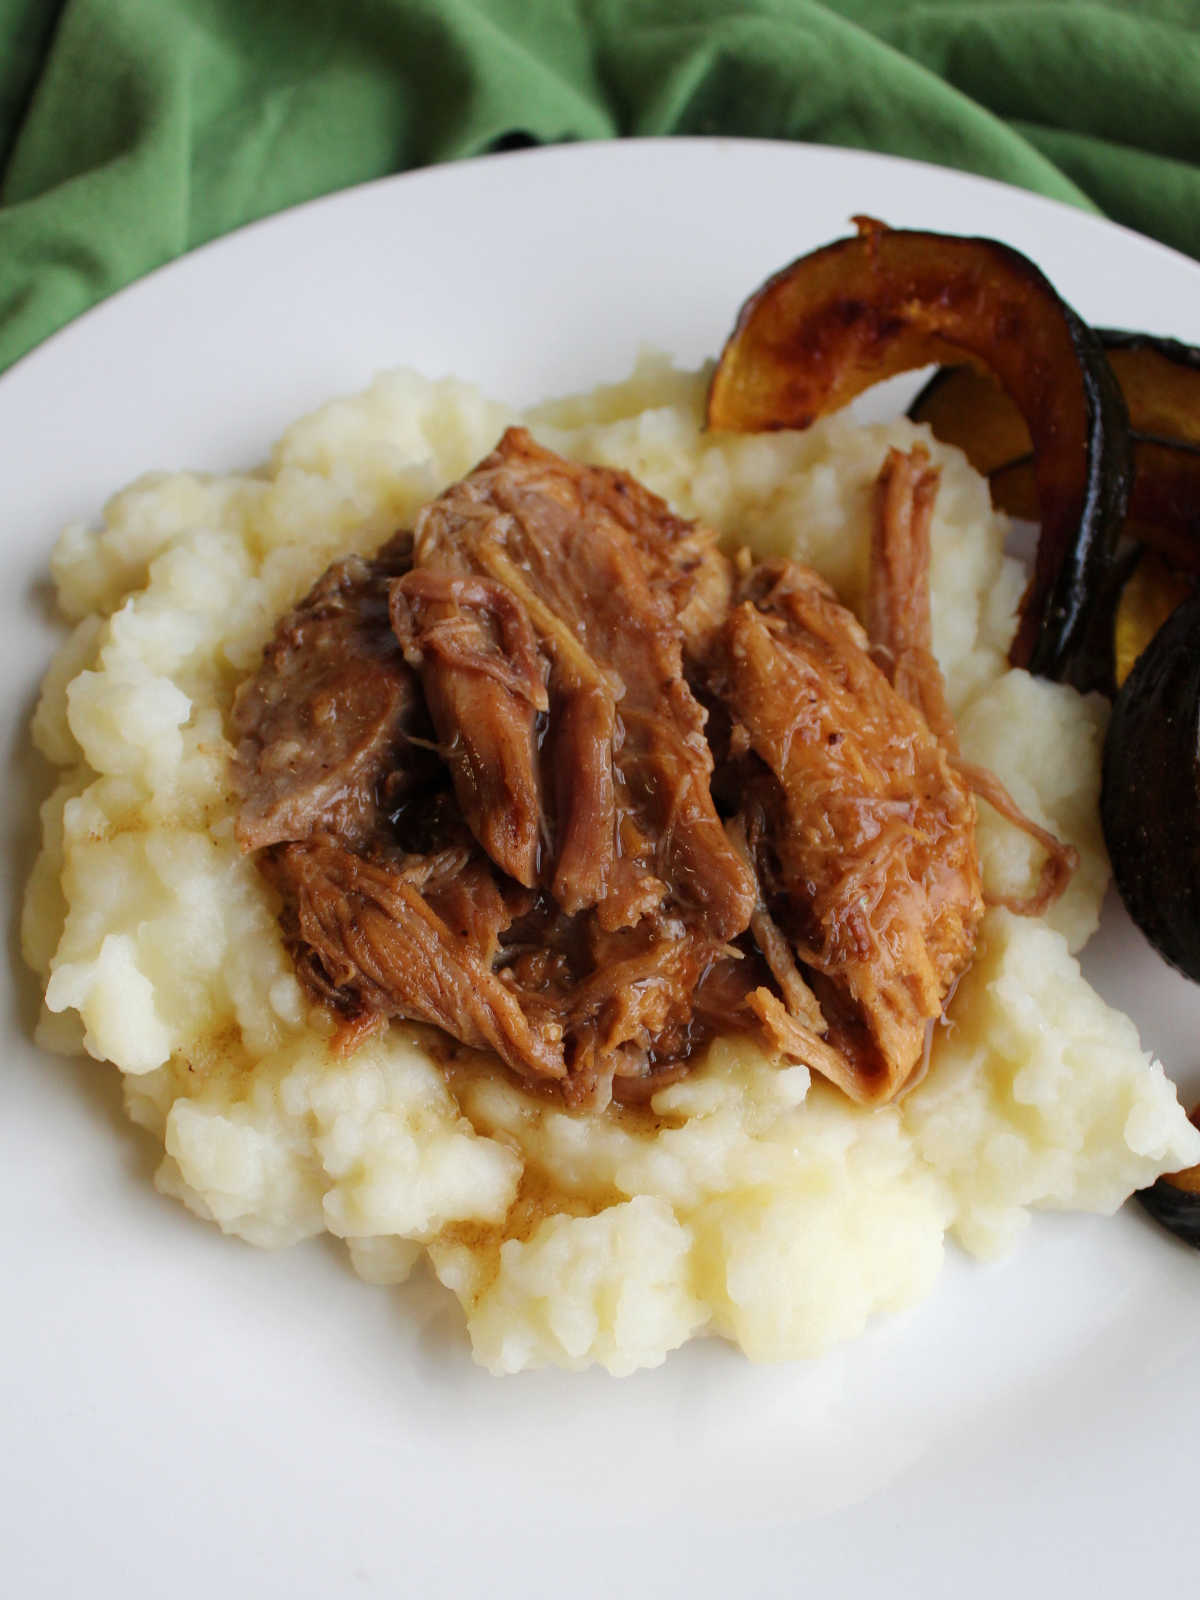 Large chunks of balsamic braised pork on mashed potatoes with roasted acorn squash nearby.